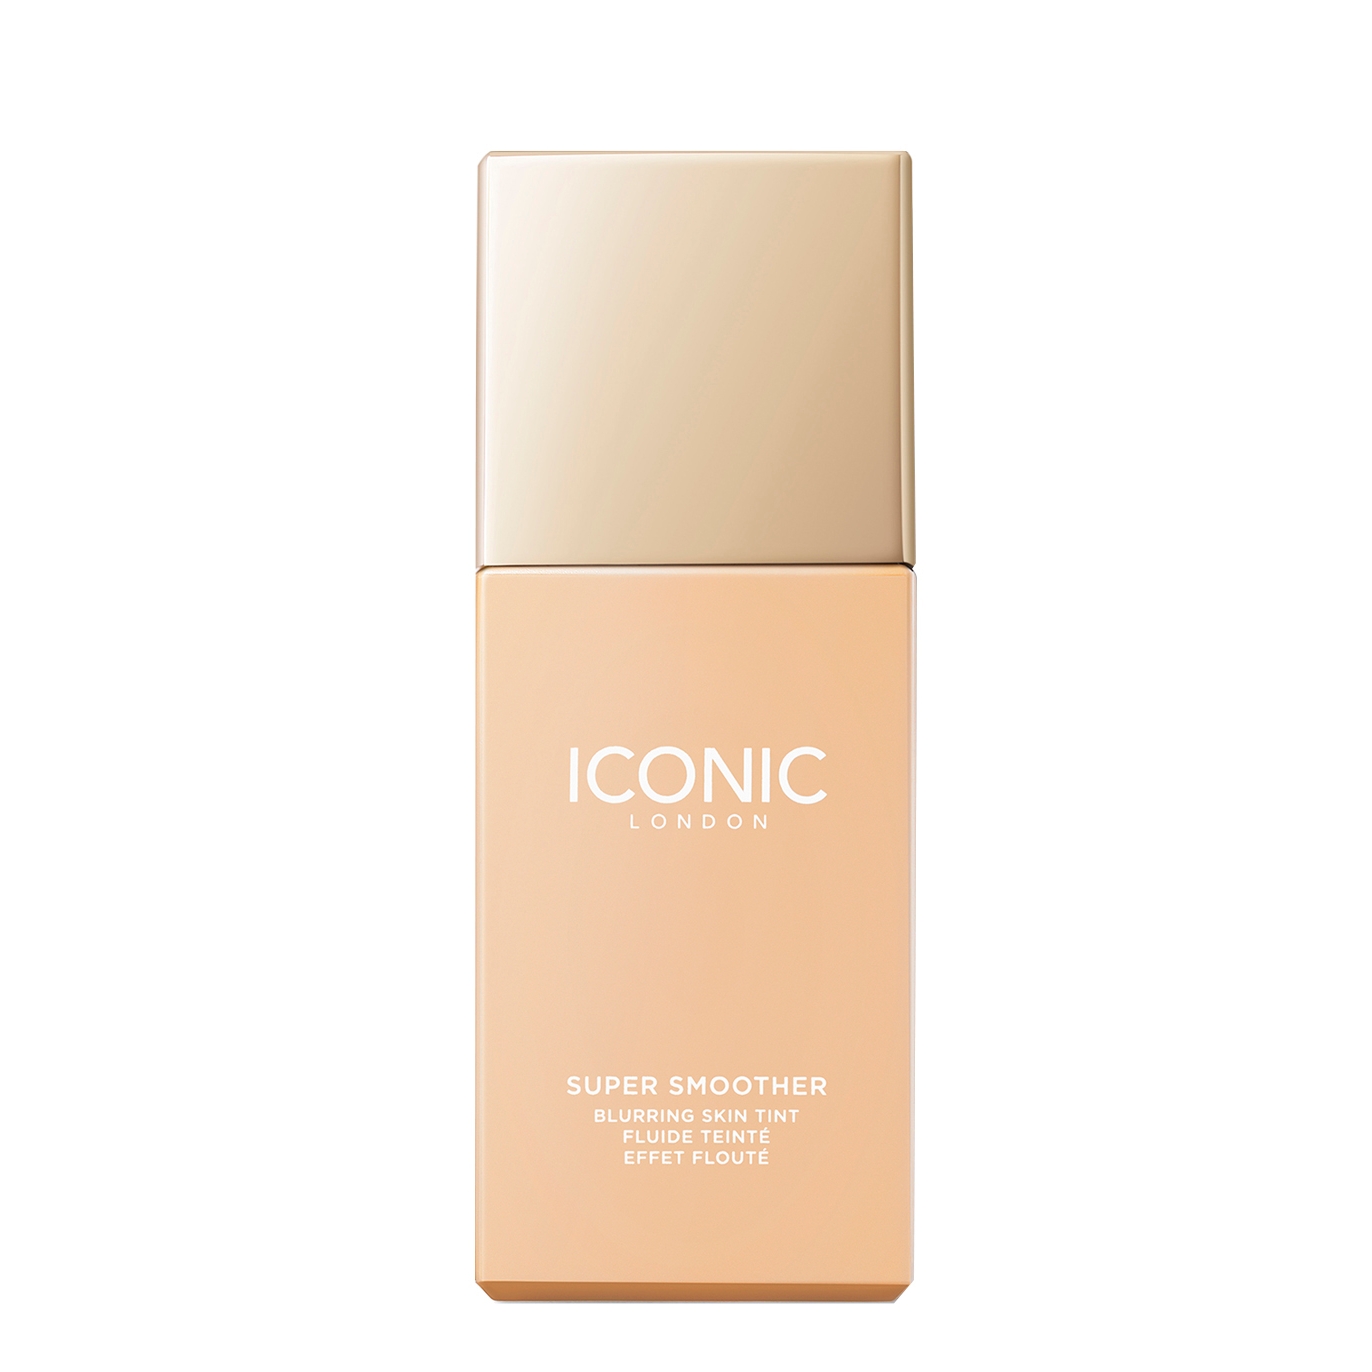 Iconic London Super Smoother Blurring Skin Tint - Colour Neutral Fair